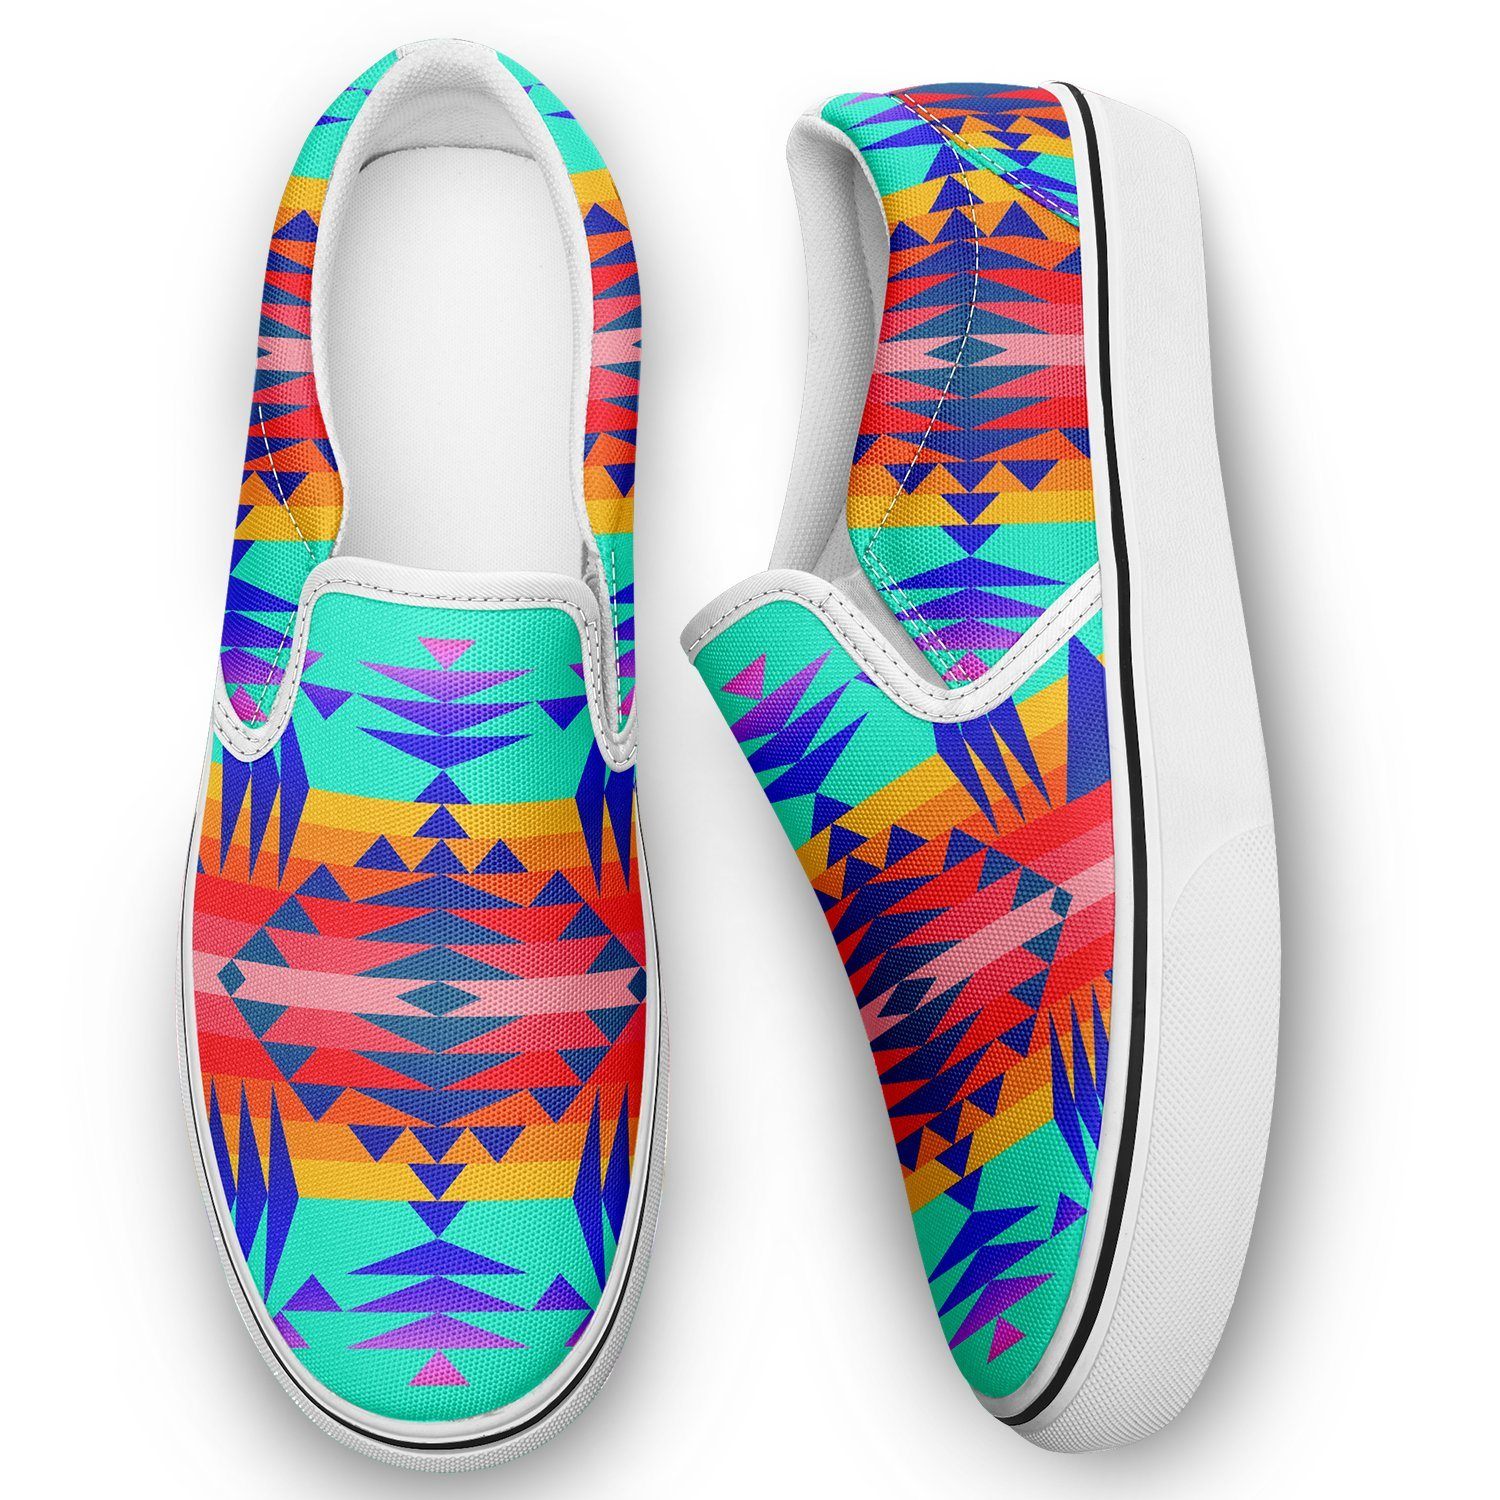 Between the Mountains Spring Otoyimm Kid's Canvas Slip On Shoes 49 Dzine 